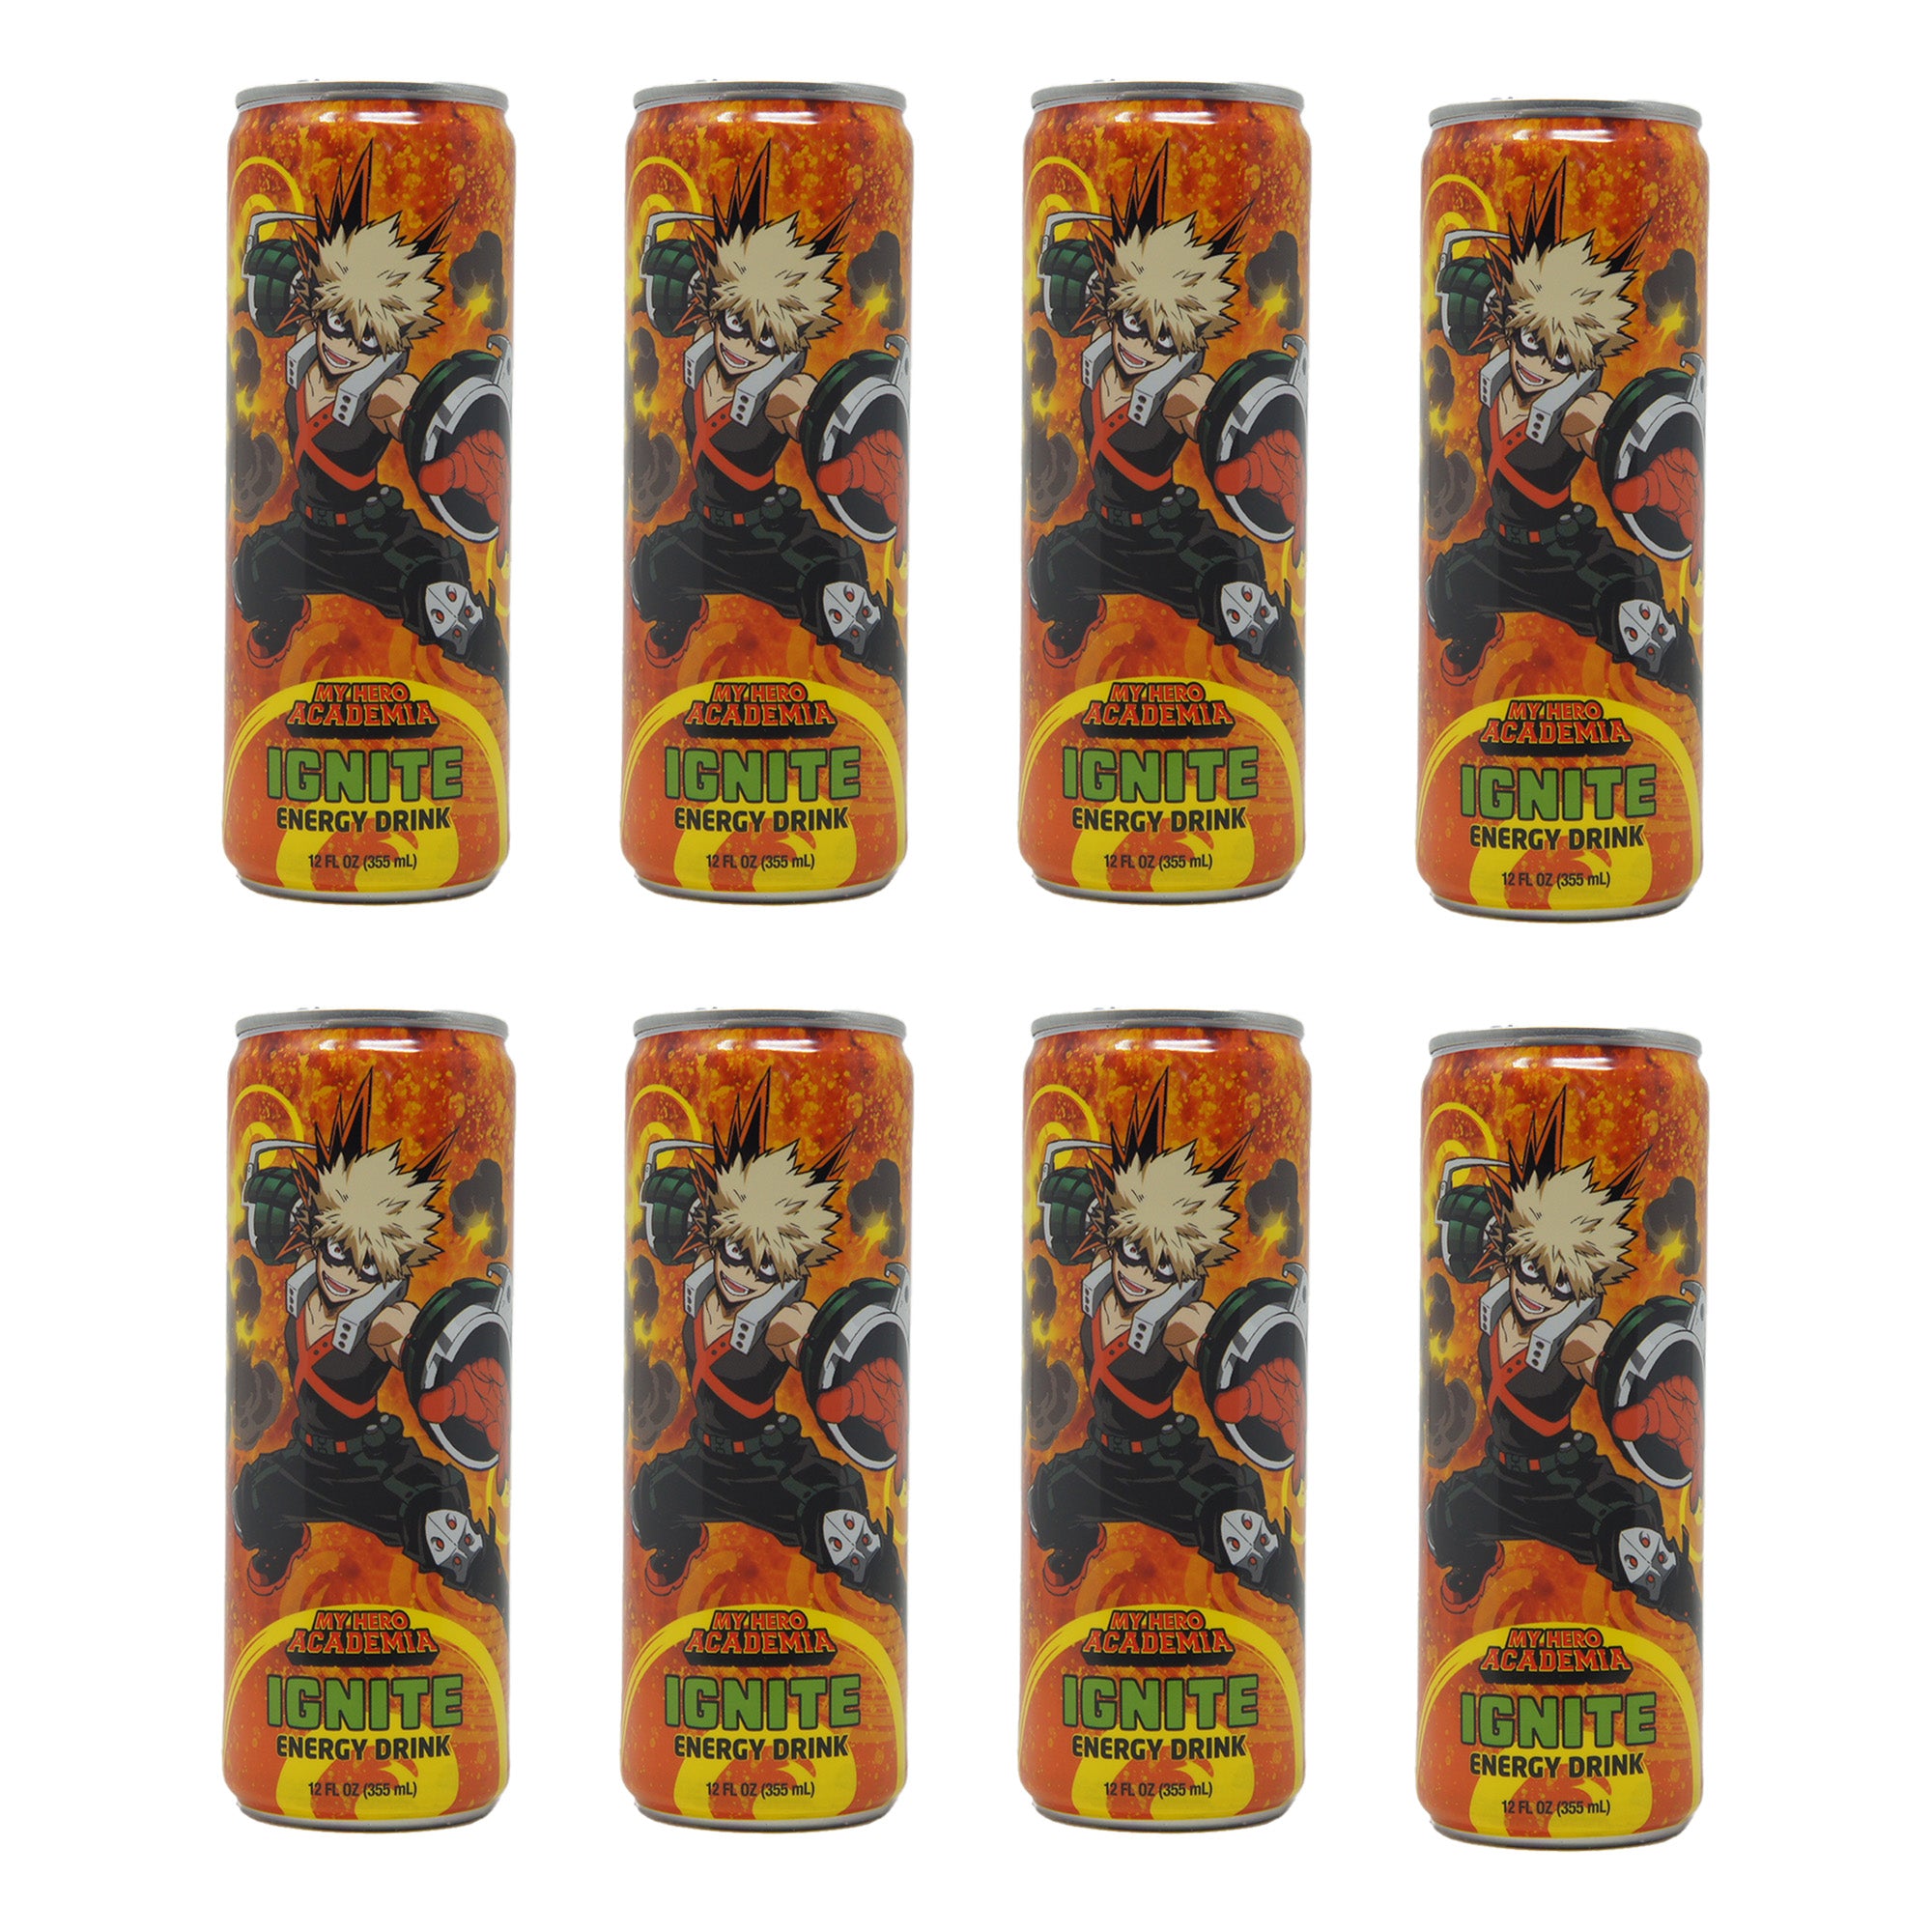 Funimation My Hero Academia Ignite Energy Drink, 12 oz Can (8 Pack)